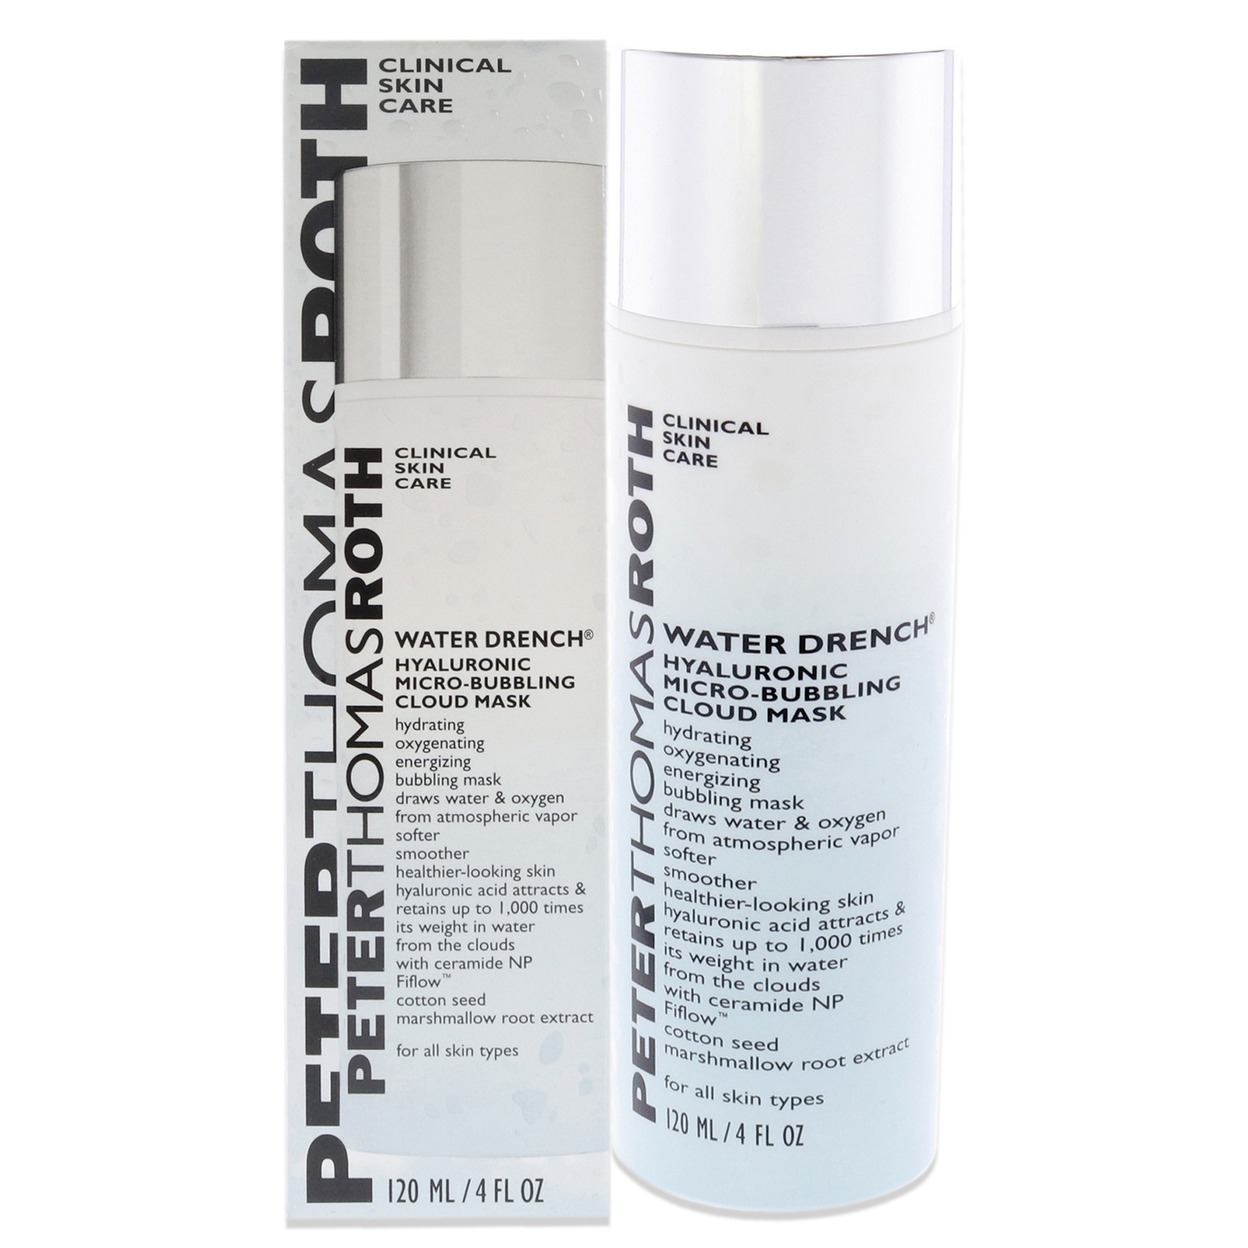 Peter Thomas Roth Water Drench Hyaluronic Micro-Bubbling Cloud Mask 4 Oz